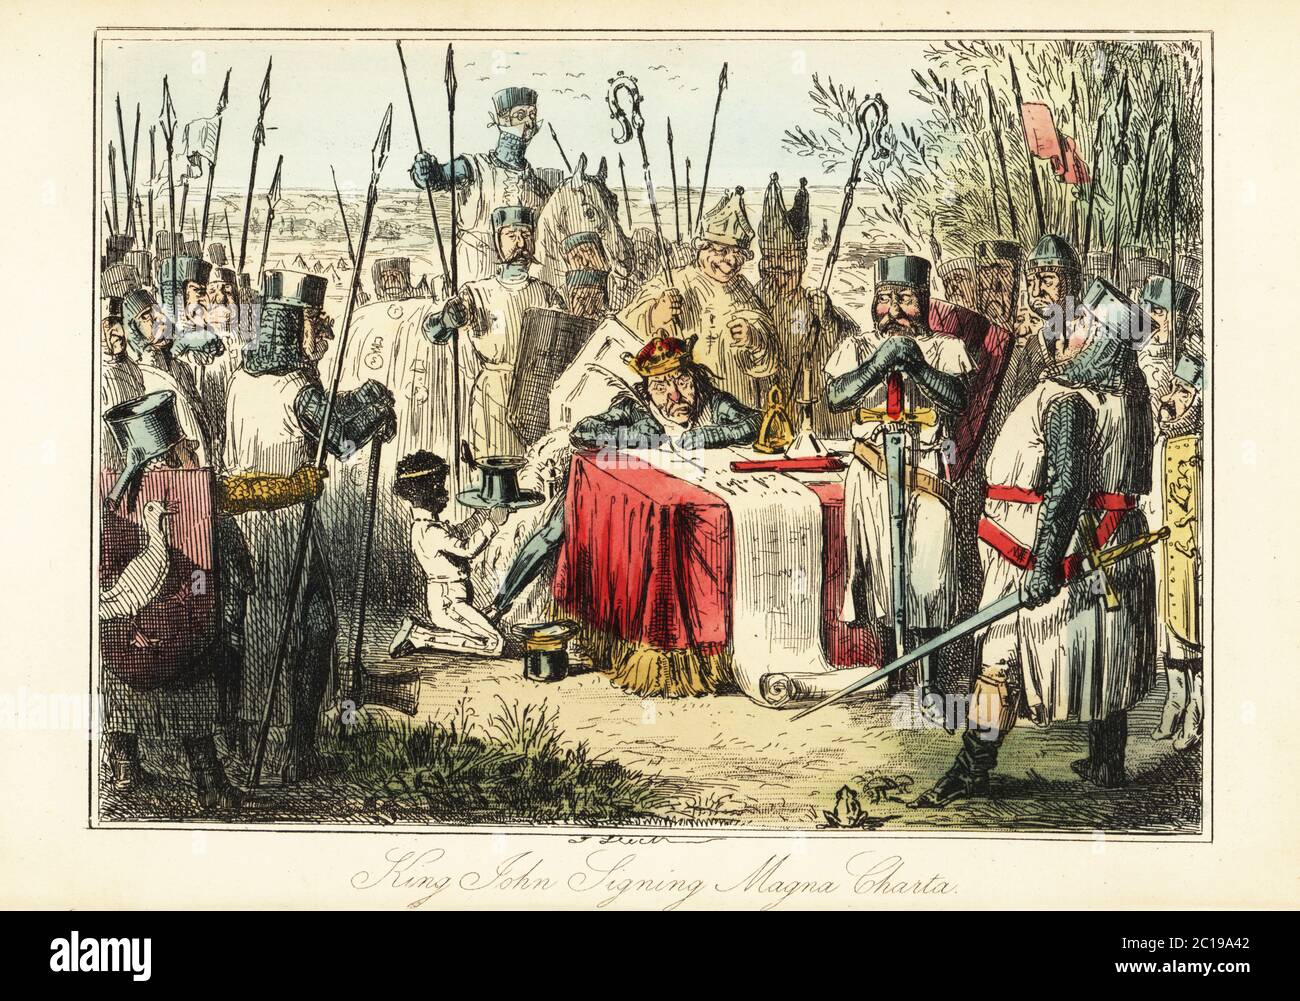 King John surrounded by barons and bishops signing the Magna Carta at Runnymede, 1215. The barons in chain mail suits of armor with tunics and boots, lances and shields with coats of arms. A young black boy slave holds an inkpot. King John signing the Magna Charta. Handcoloured steel engraving after an illustration by John Leech from Gilbert Abbott A’Beckett’s Comic History of England, Bradbury, Agnew & Co., London, 1880. Stock Photo